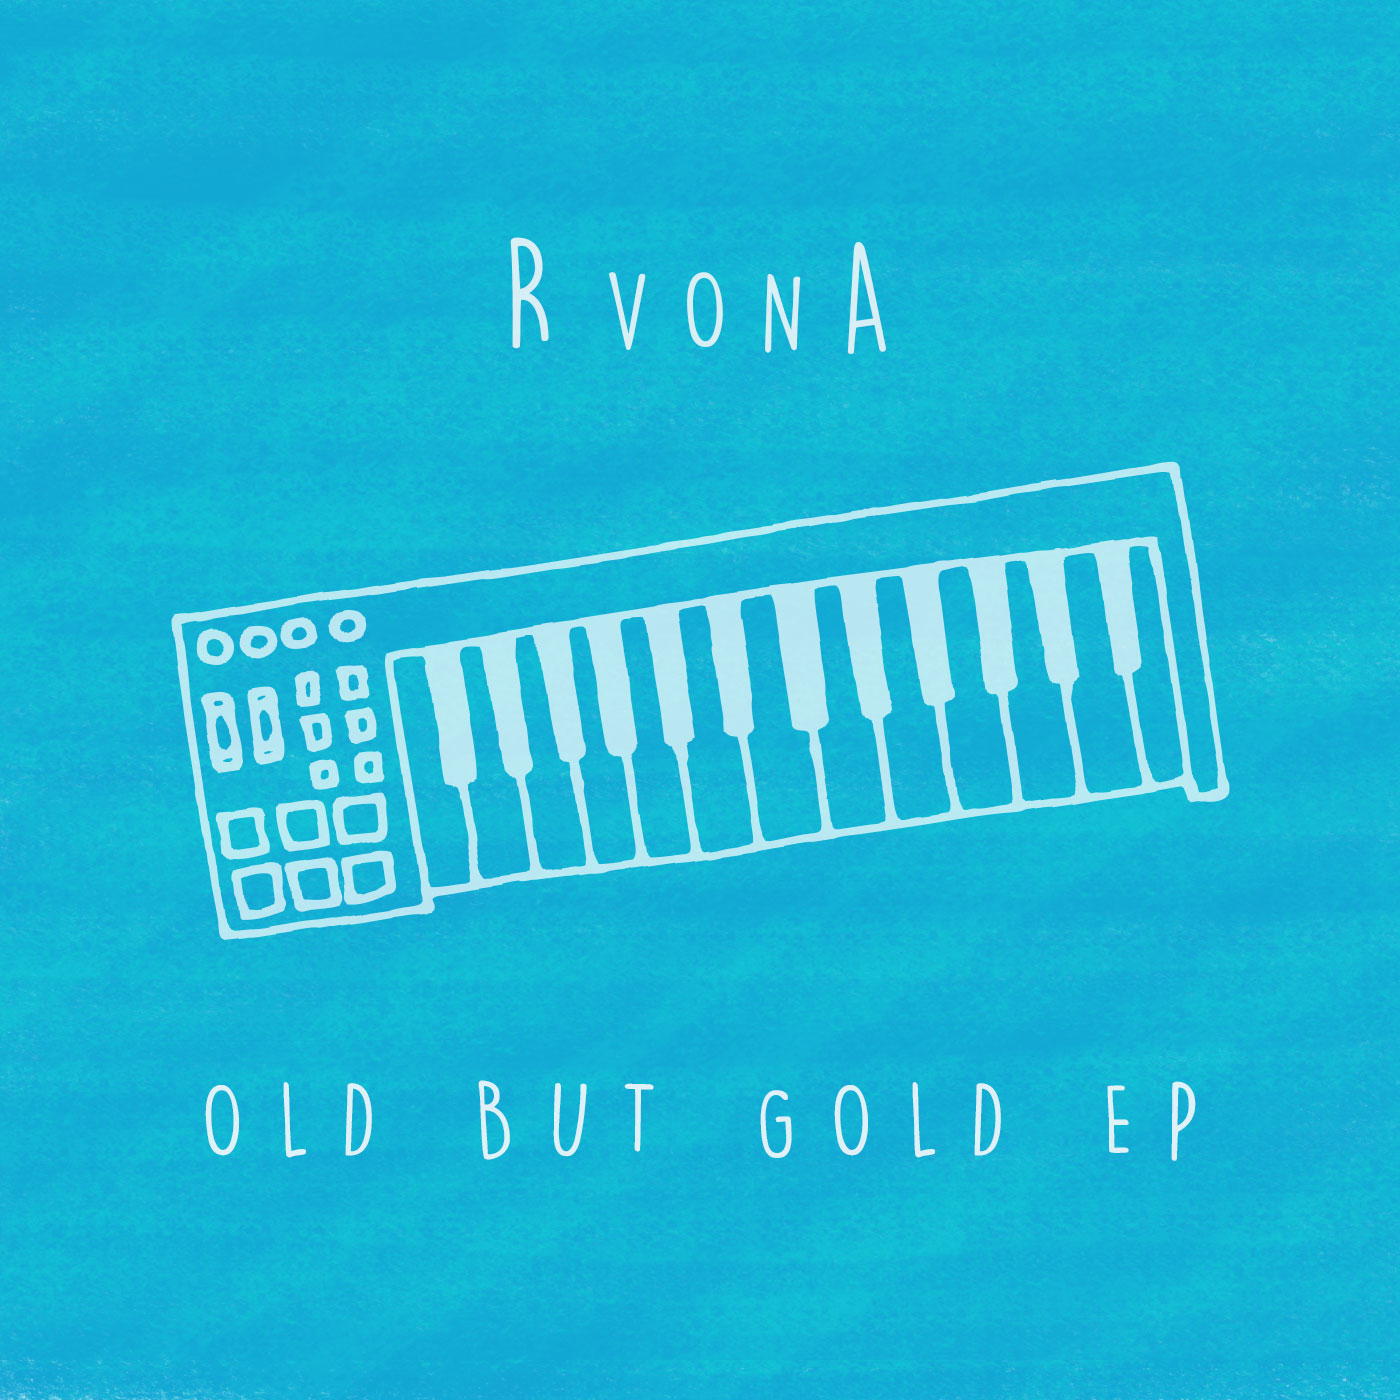 OLD BUT GOLD EP - RvonA 2021